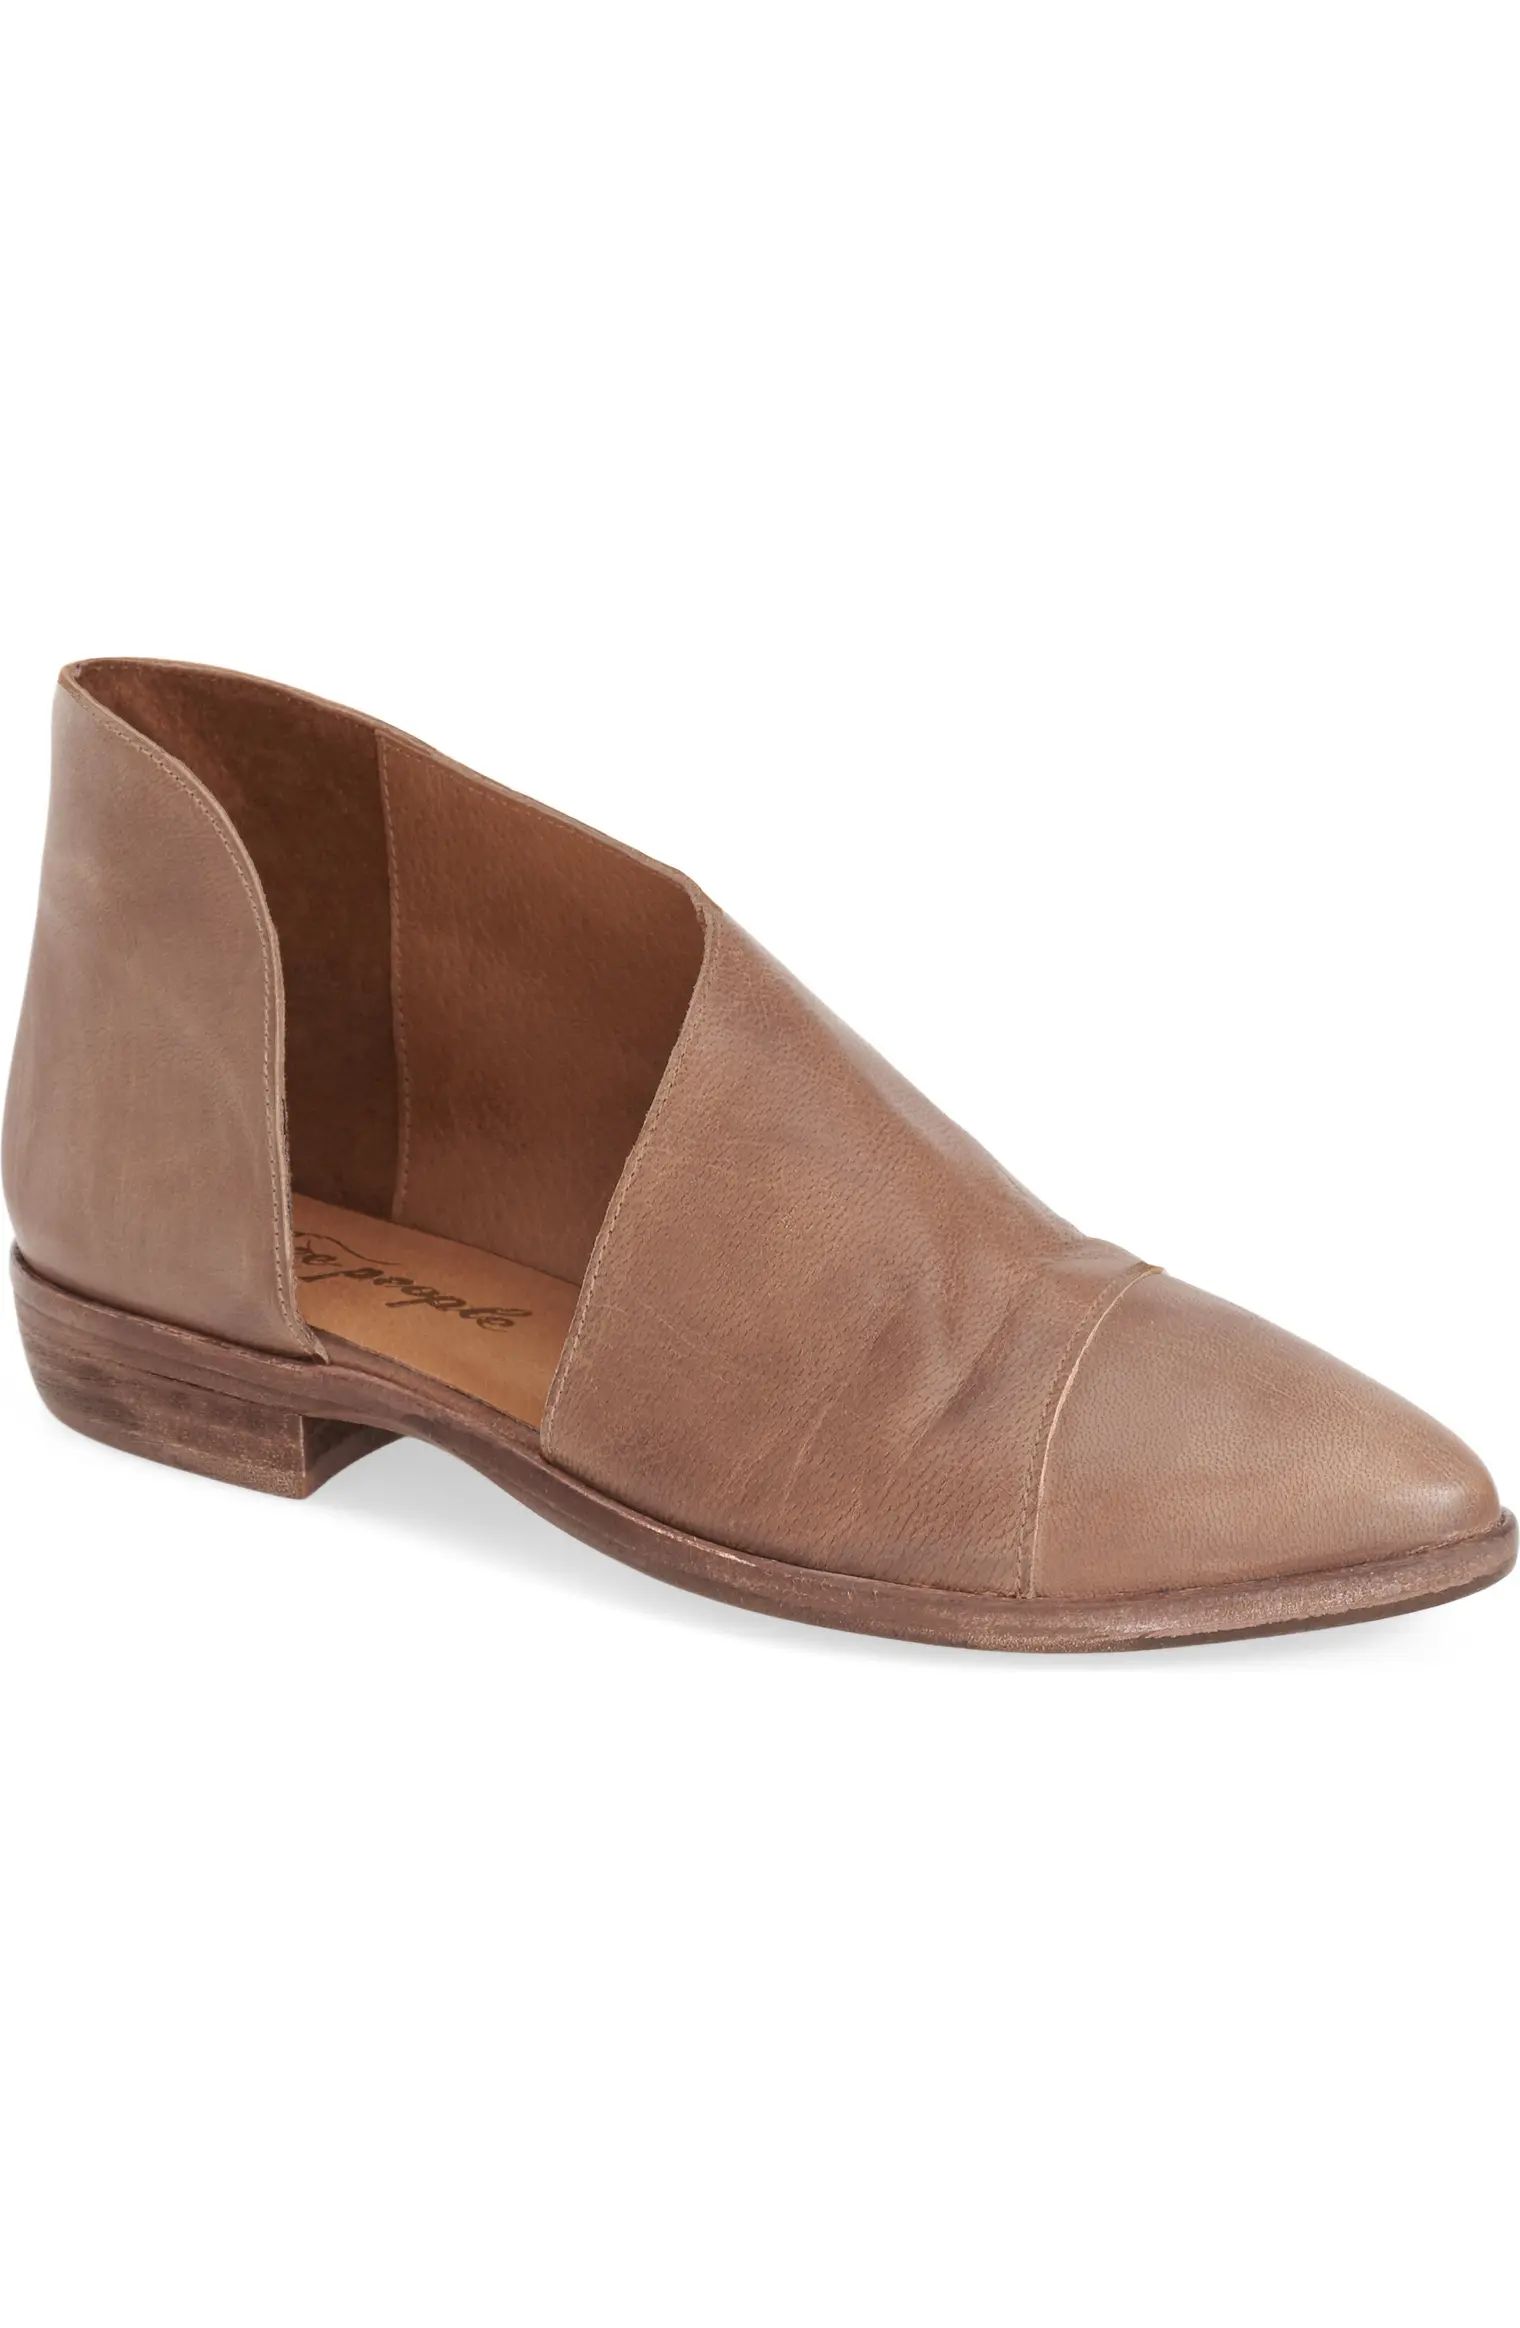 'Royale' Pointy Toe Flat | Nordstrom